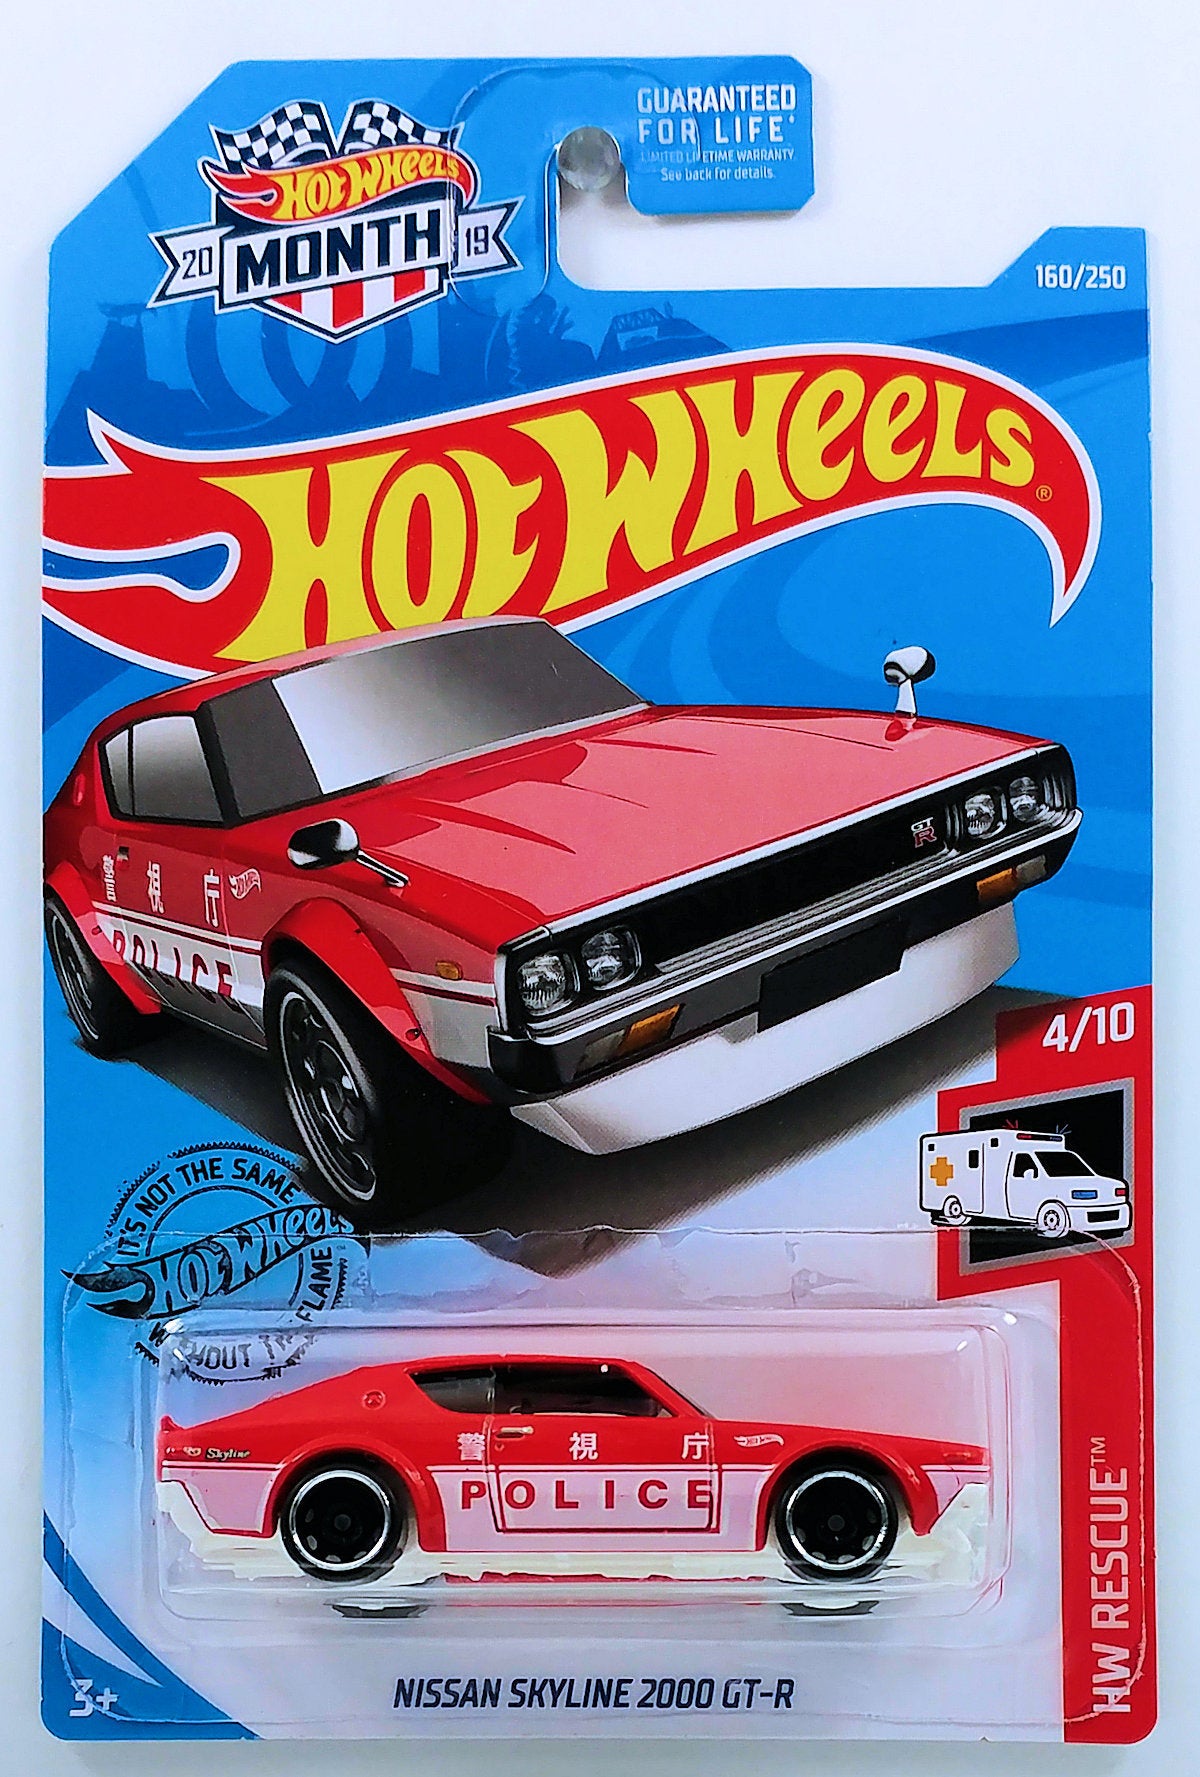 Hot Wheels 2019 - Collector # 160/250 - HW Rescue 4/10 - Nissan Skyline 2000 GT-R - Red - USA 'Month'